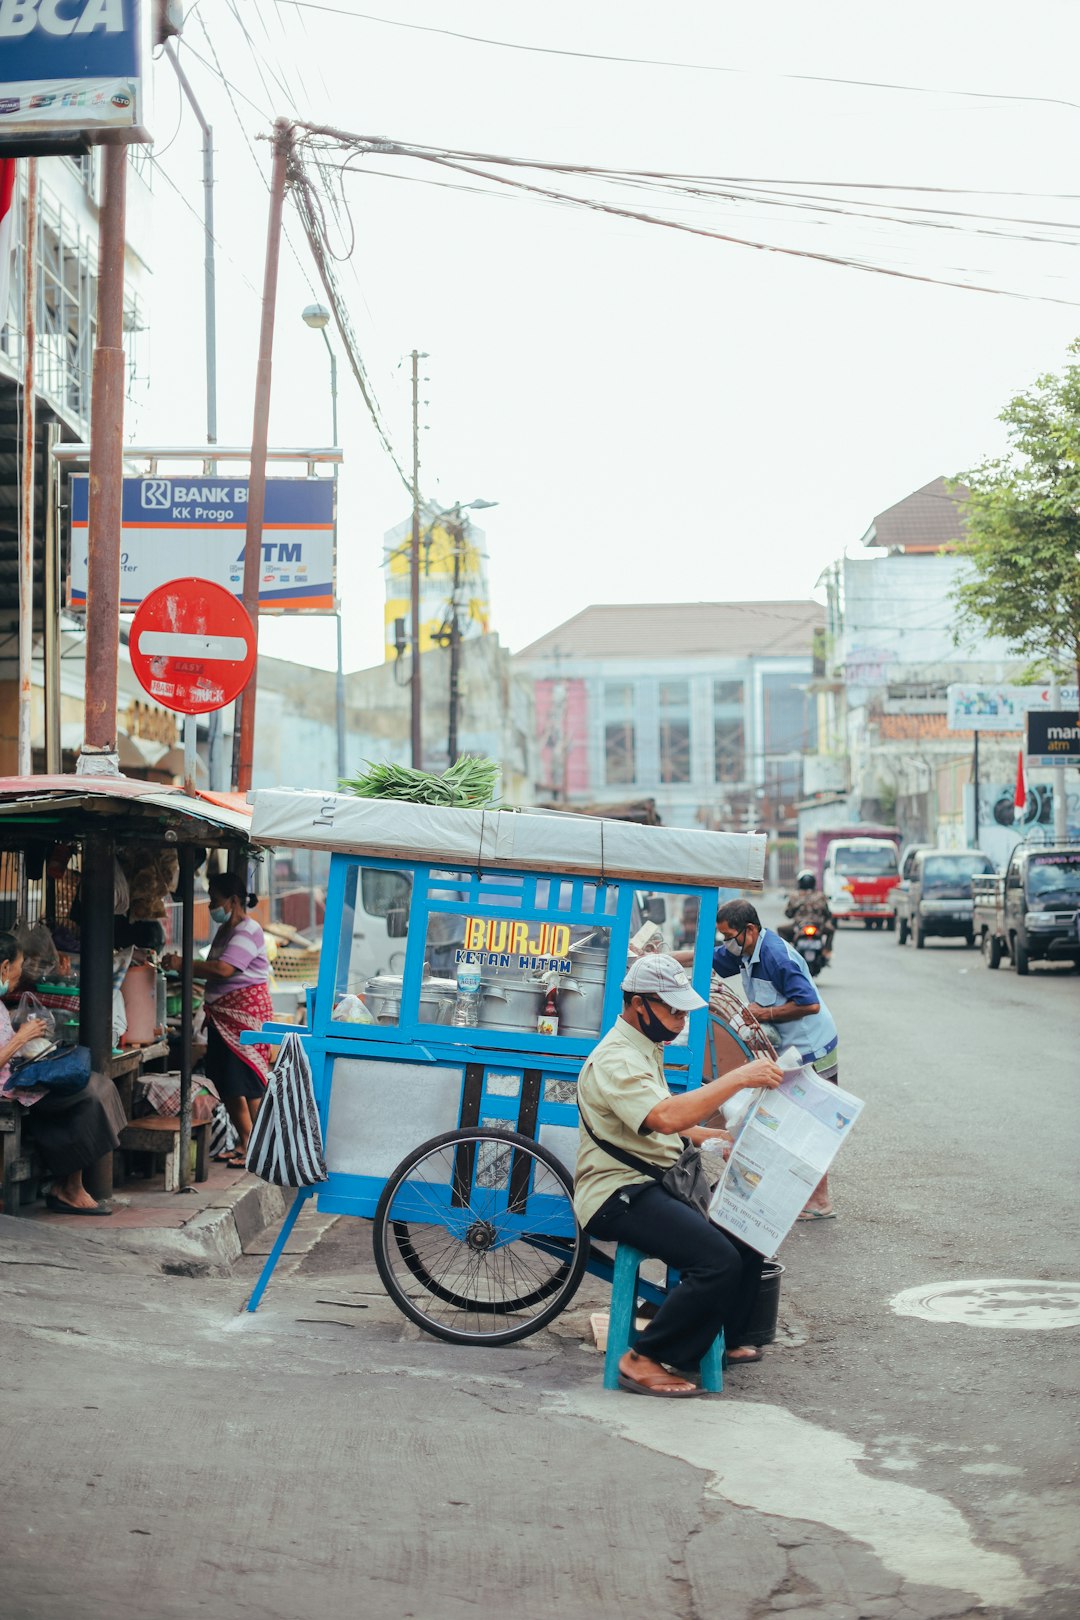 people riding on blue and white trike during daytime